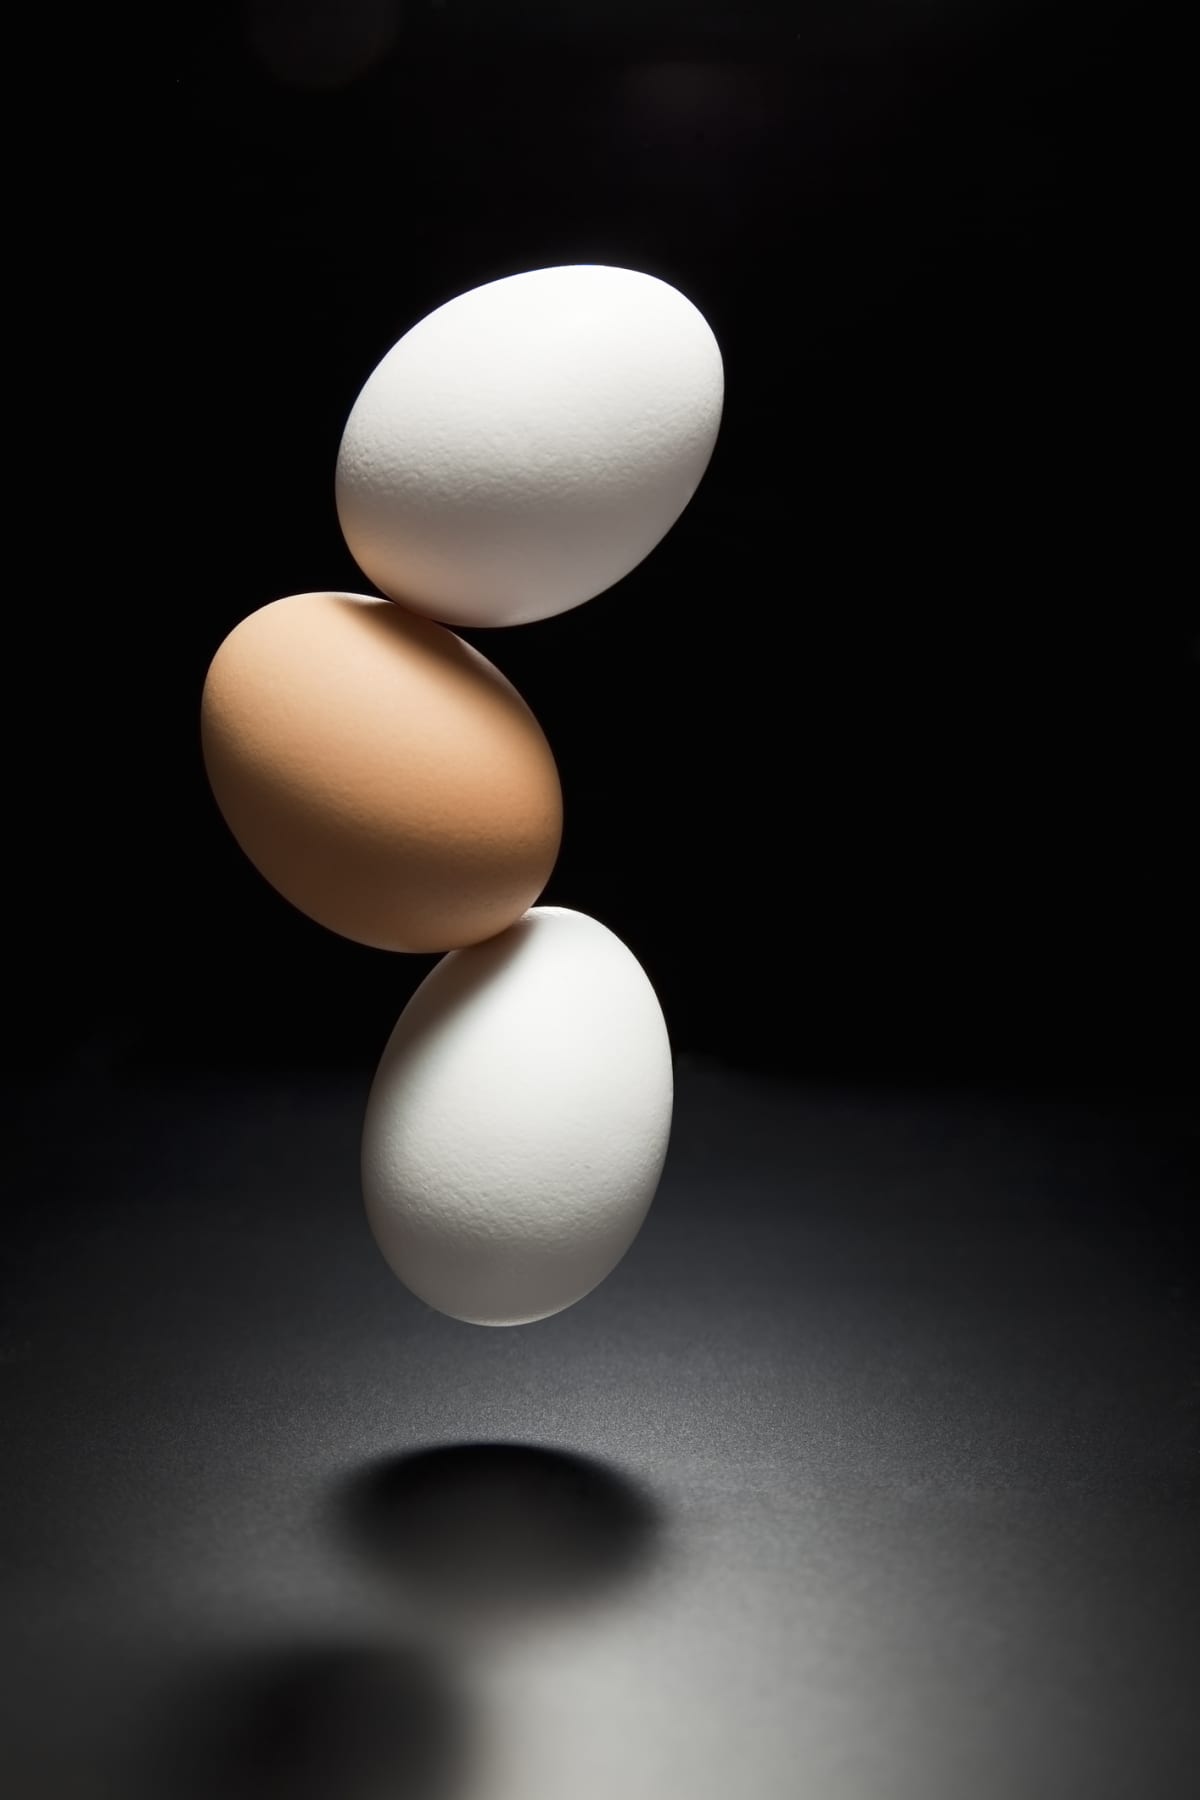 Eggs stacked against a black background.